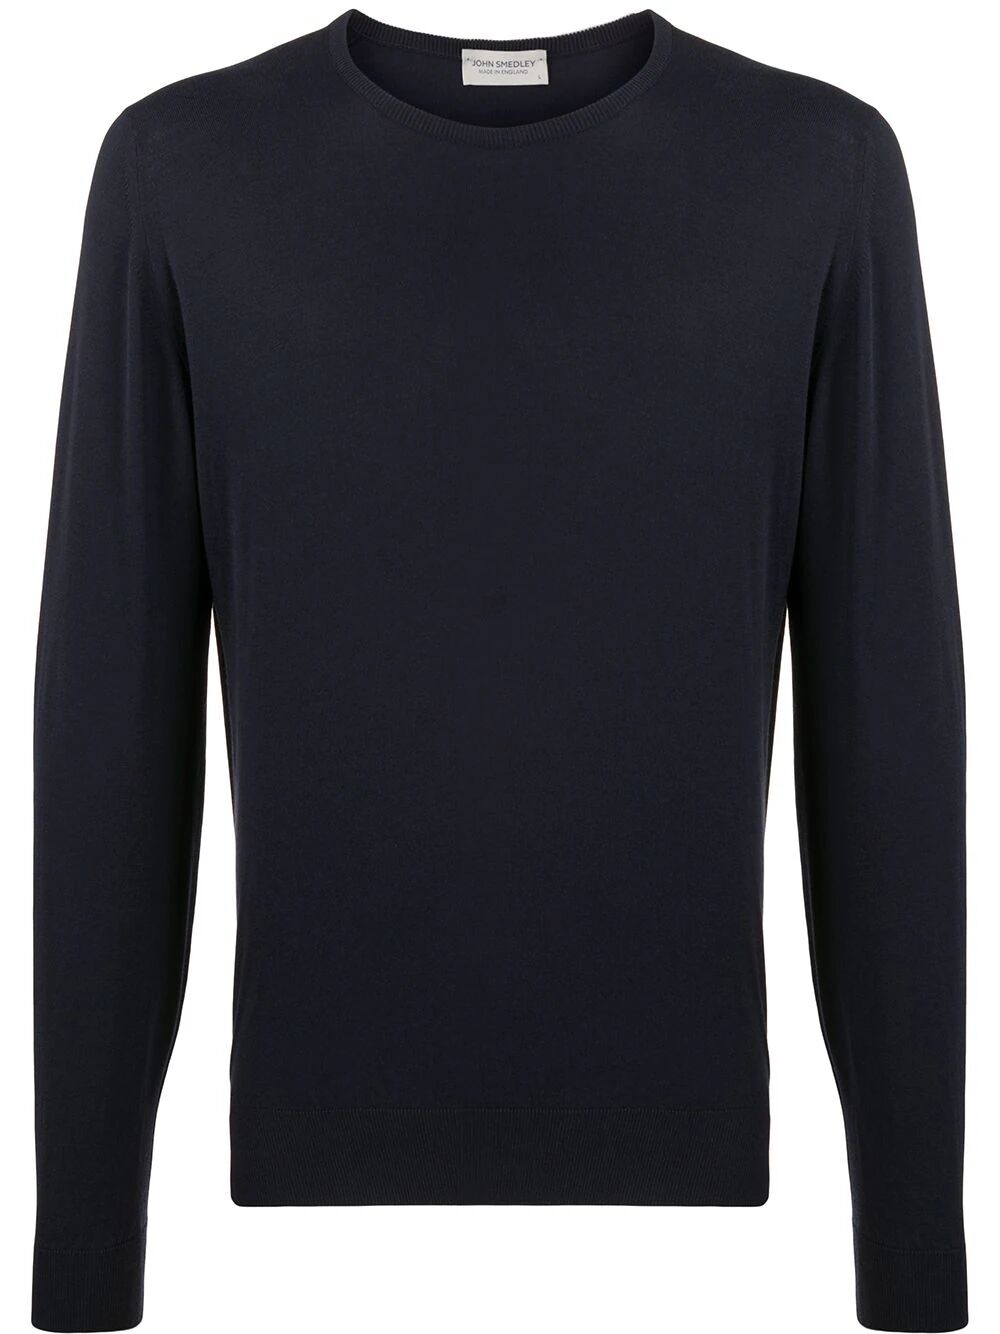 Hatfield Crew Neck Long Sleeves Pullover